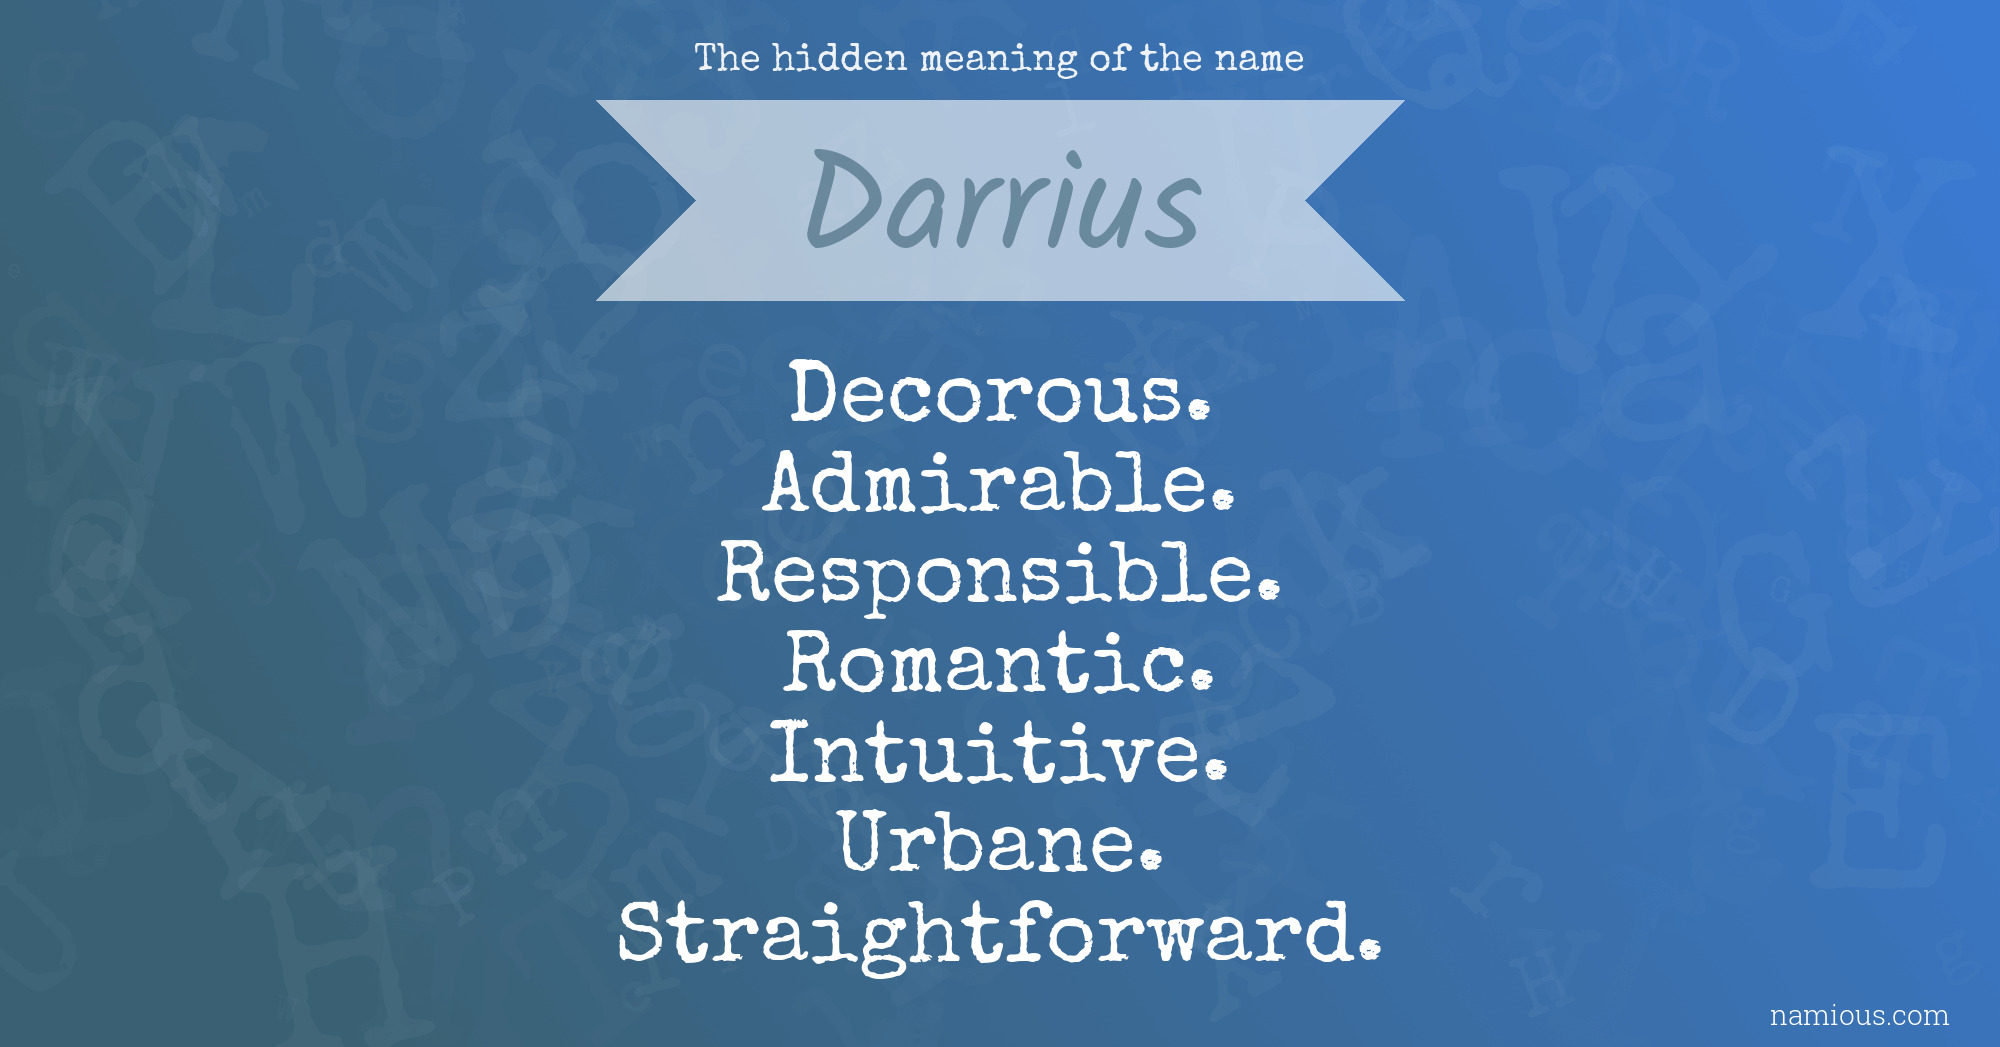 The hidden meaning of the name Darrius